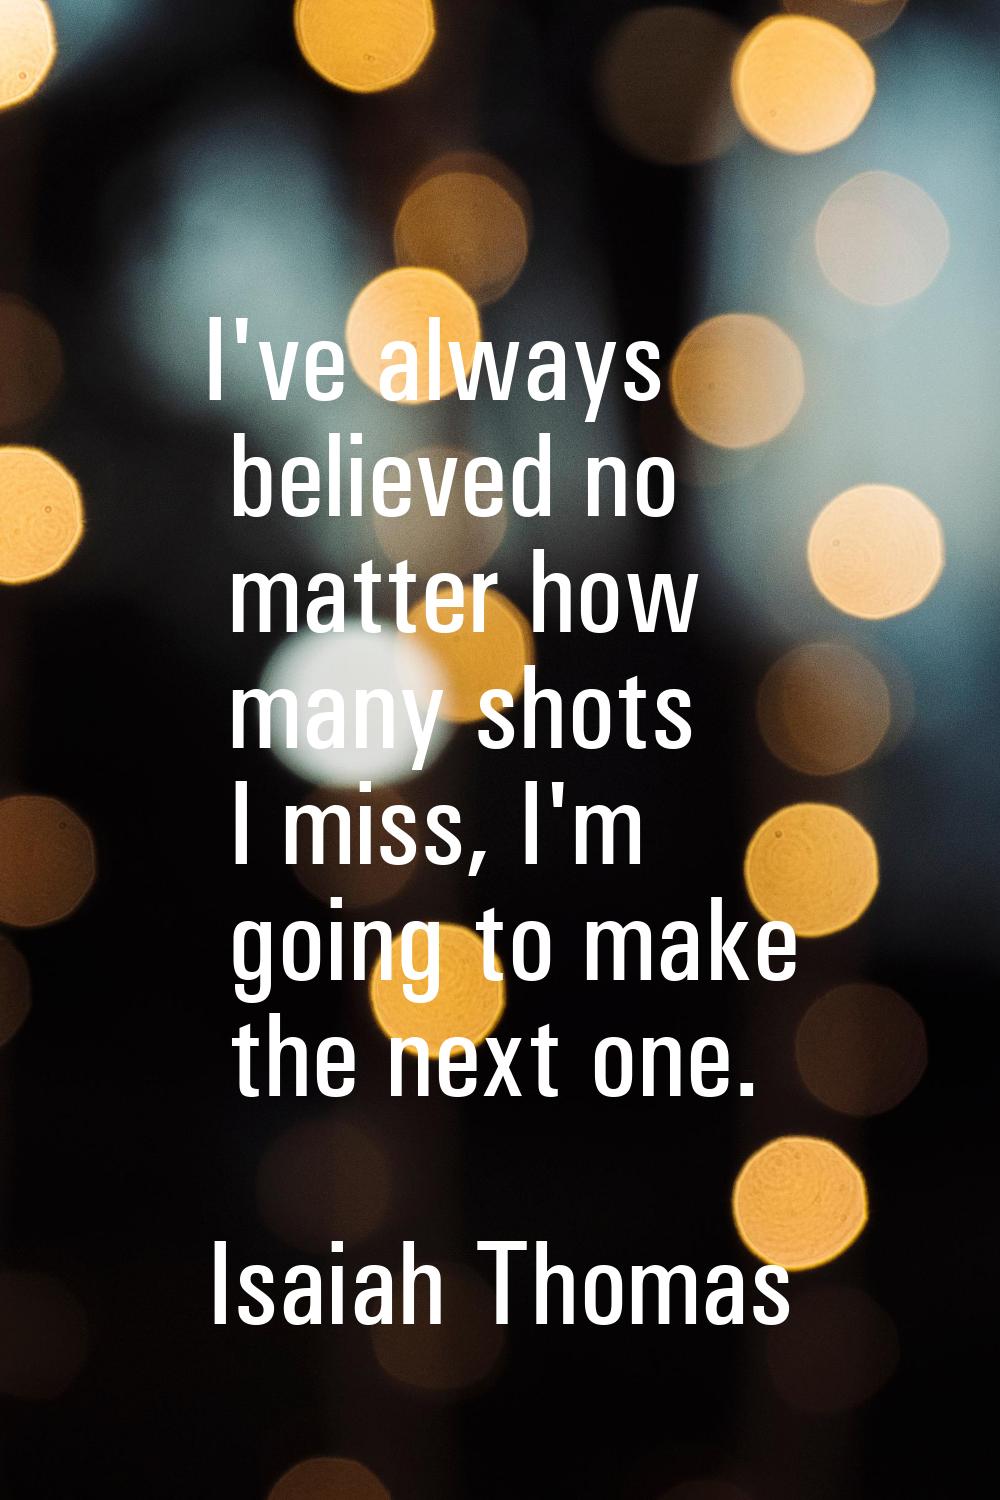 I've always believed no matter how many shots I miss, I'm going to make the next one.